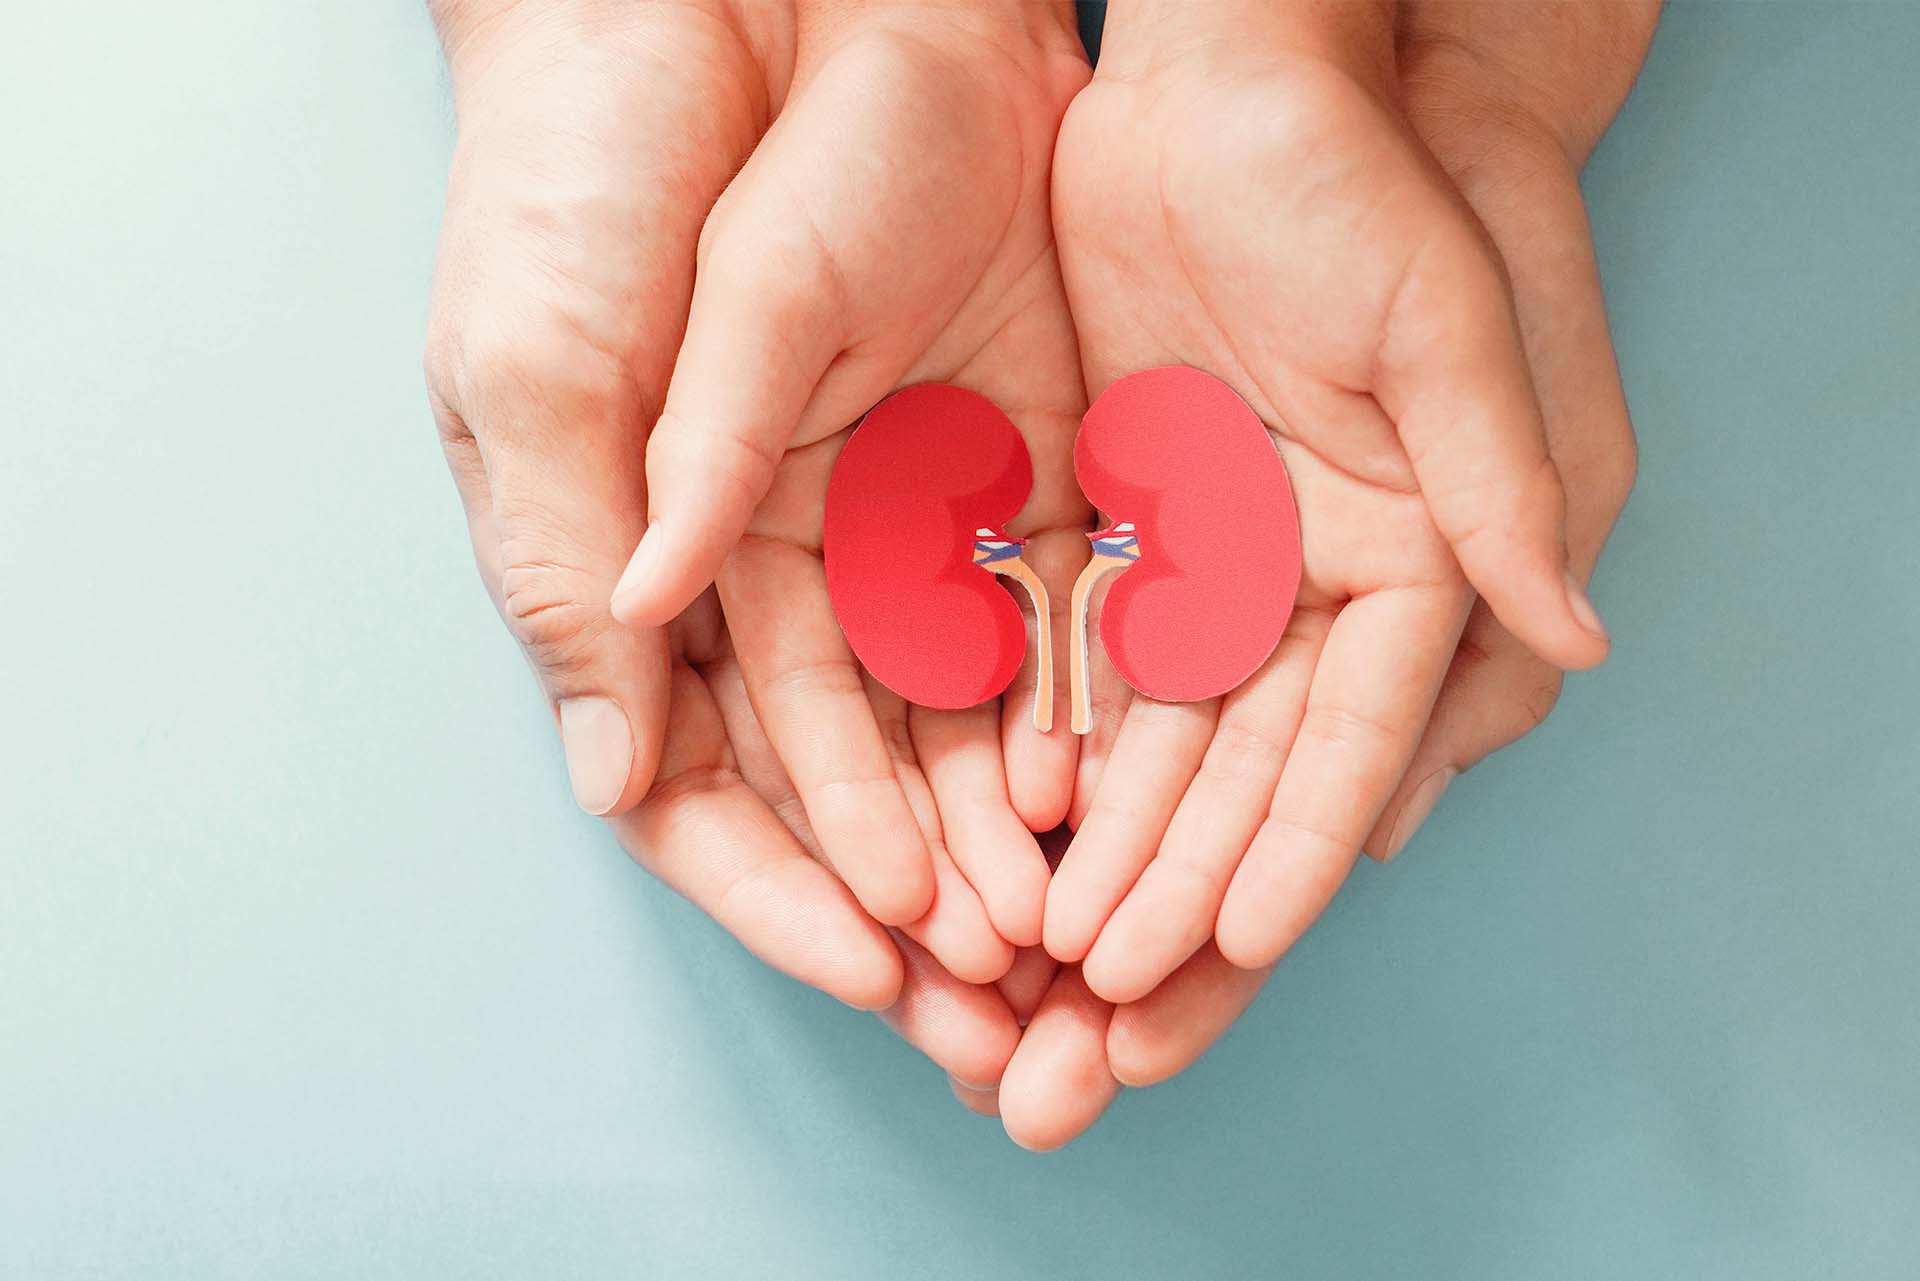 Hands holding picture of kidneys